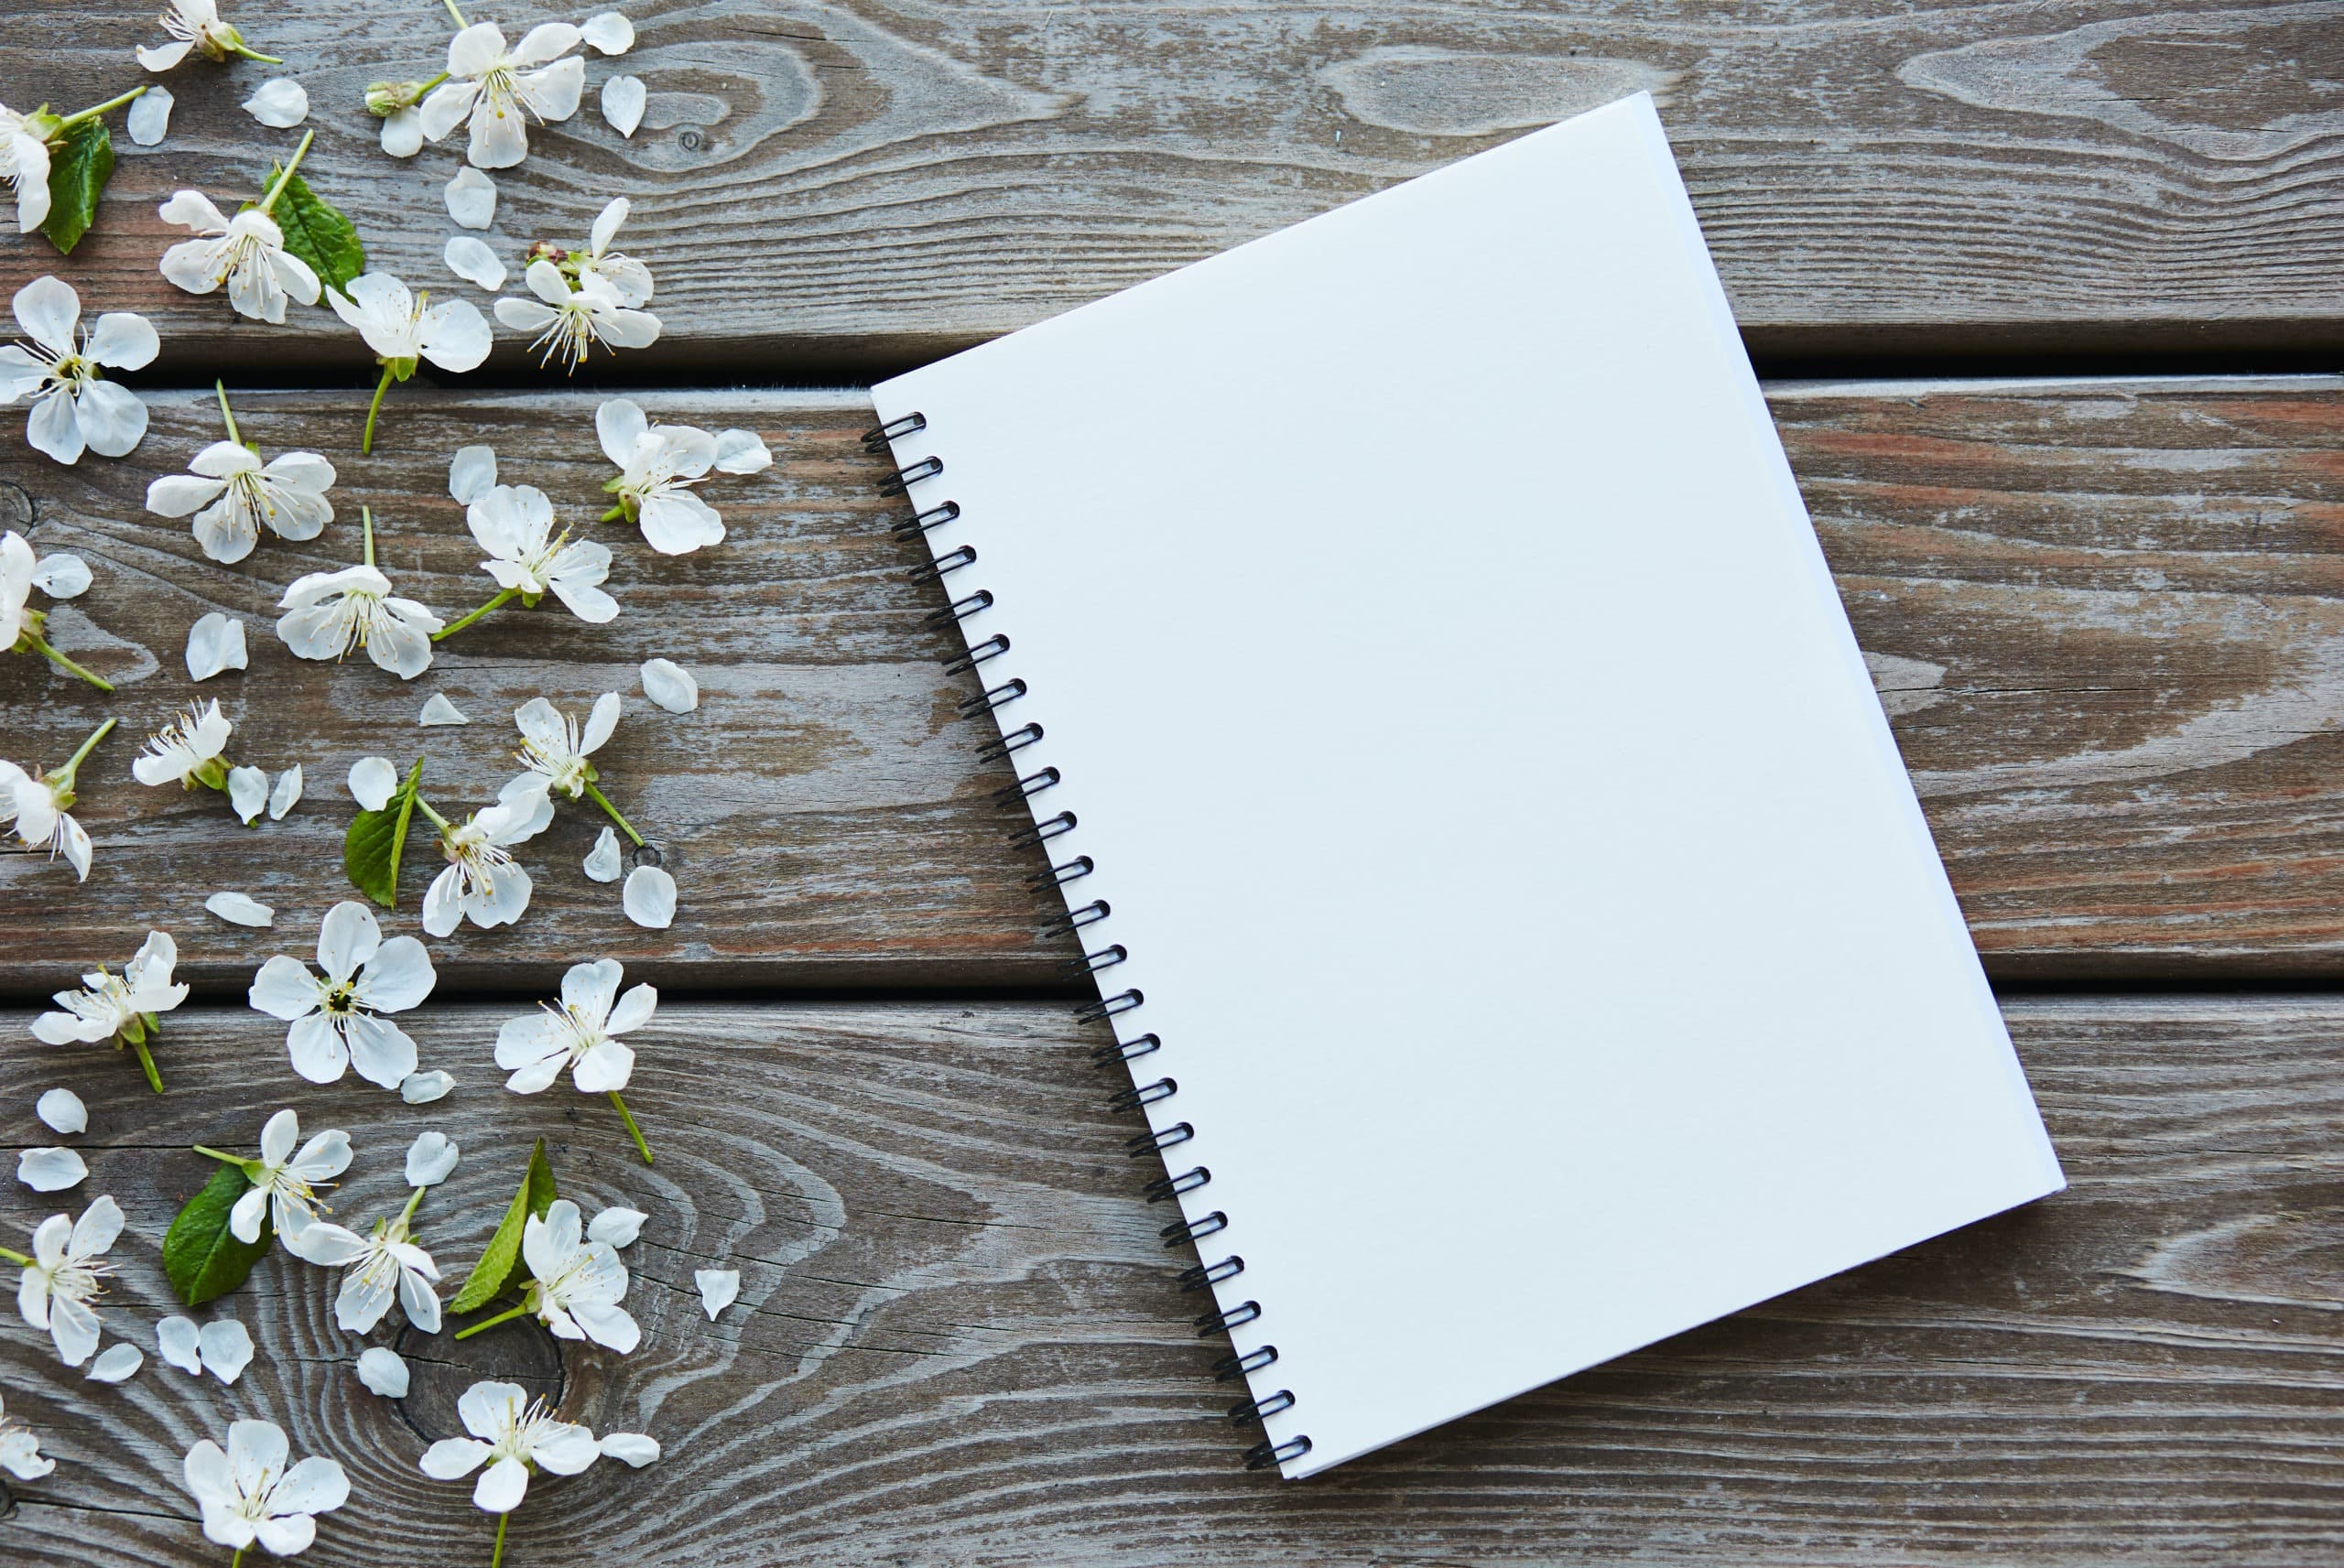 An empty notebook covered with cherry flowers on a wooden table.